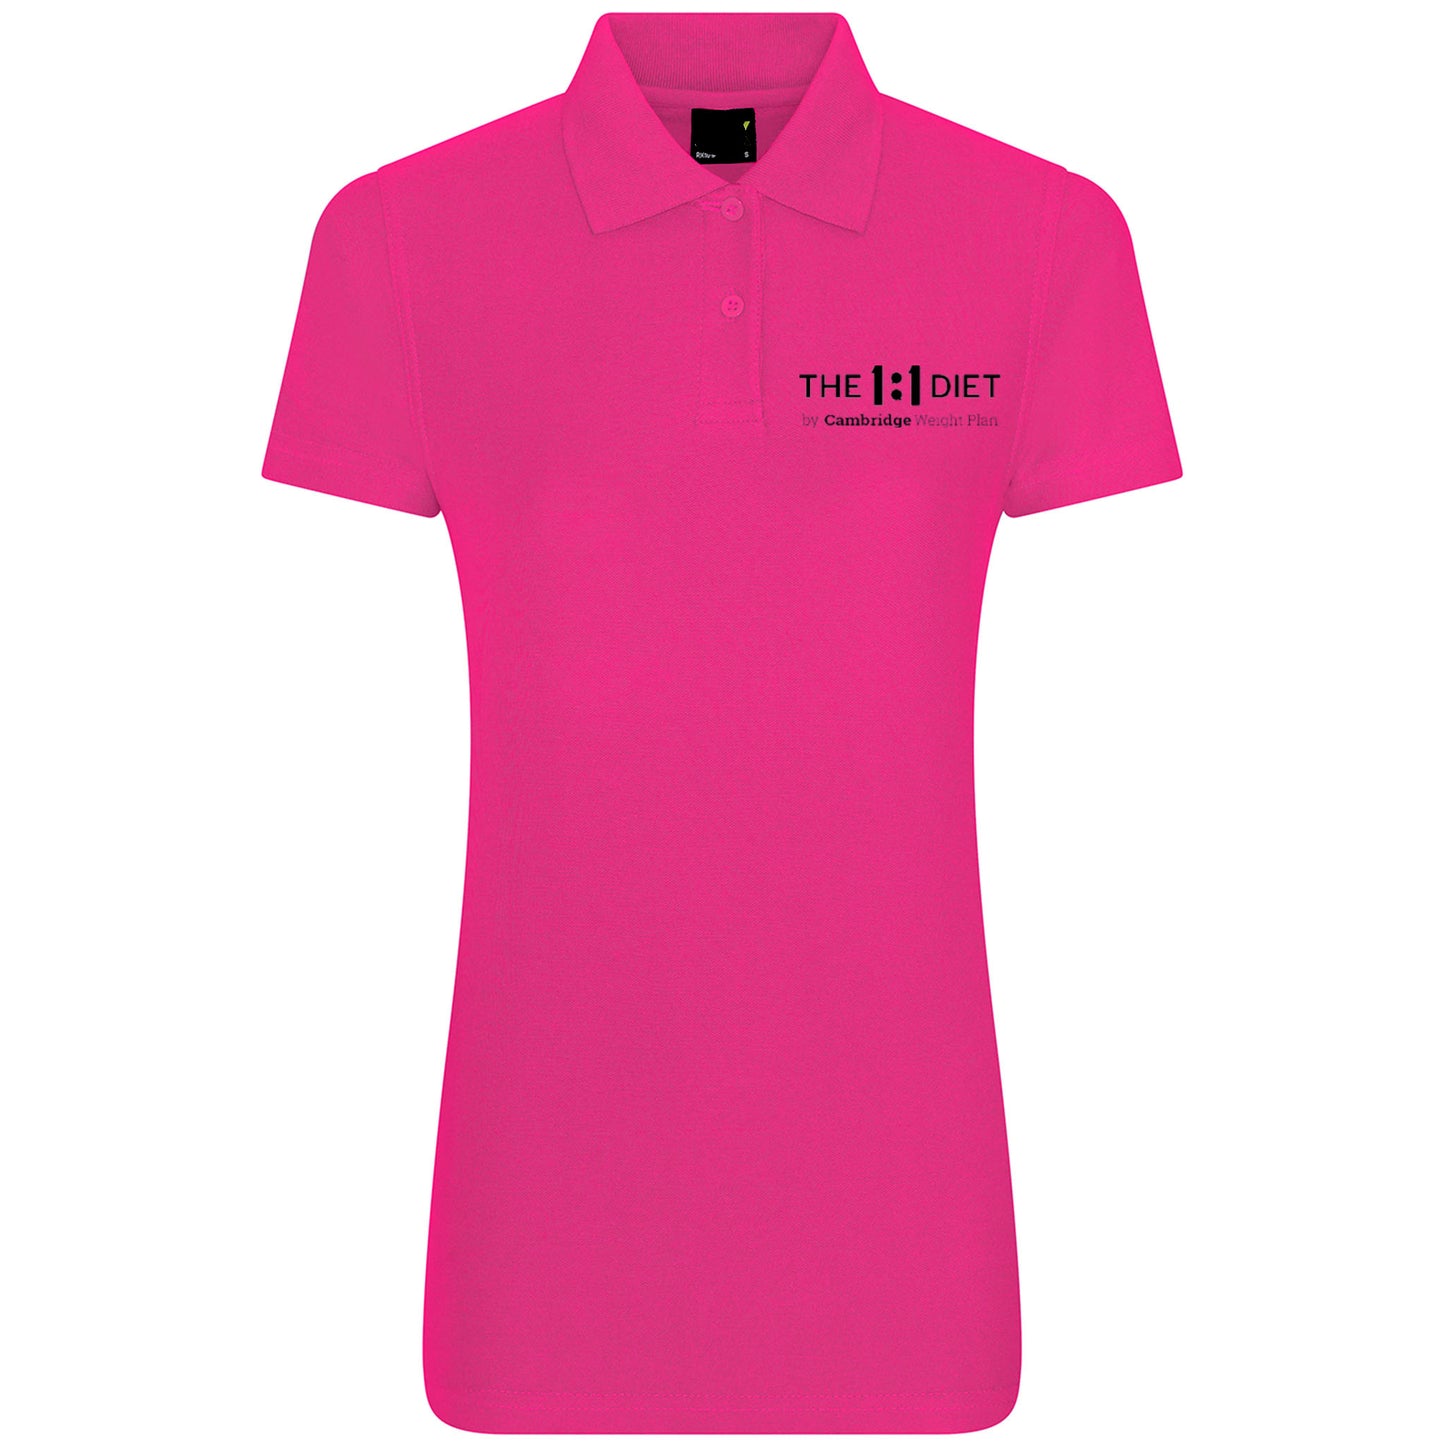 The 1:1 Diet - Ladies Fit Polo-Shirt